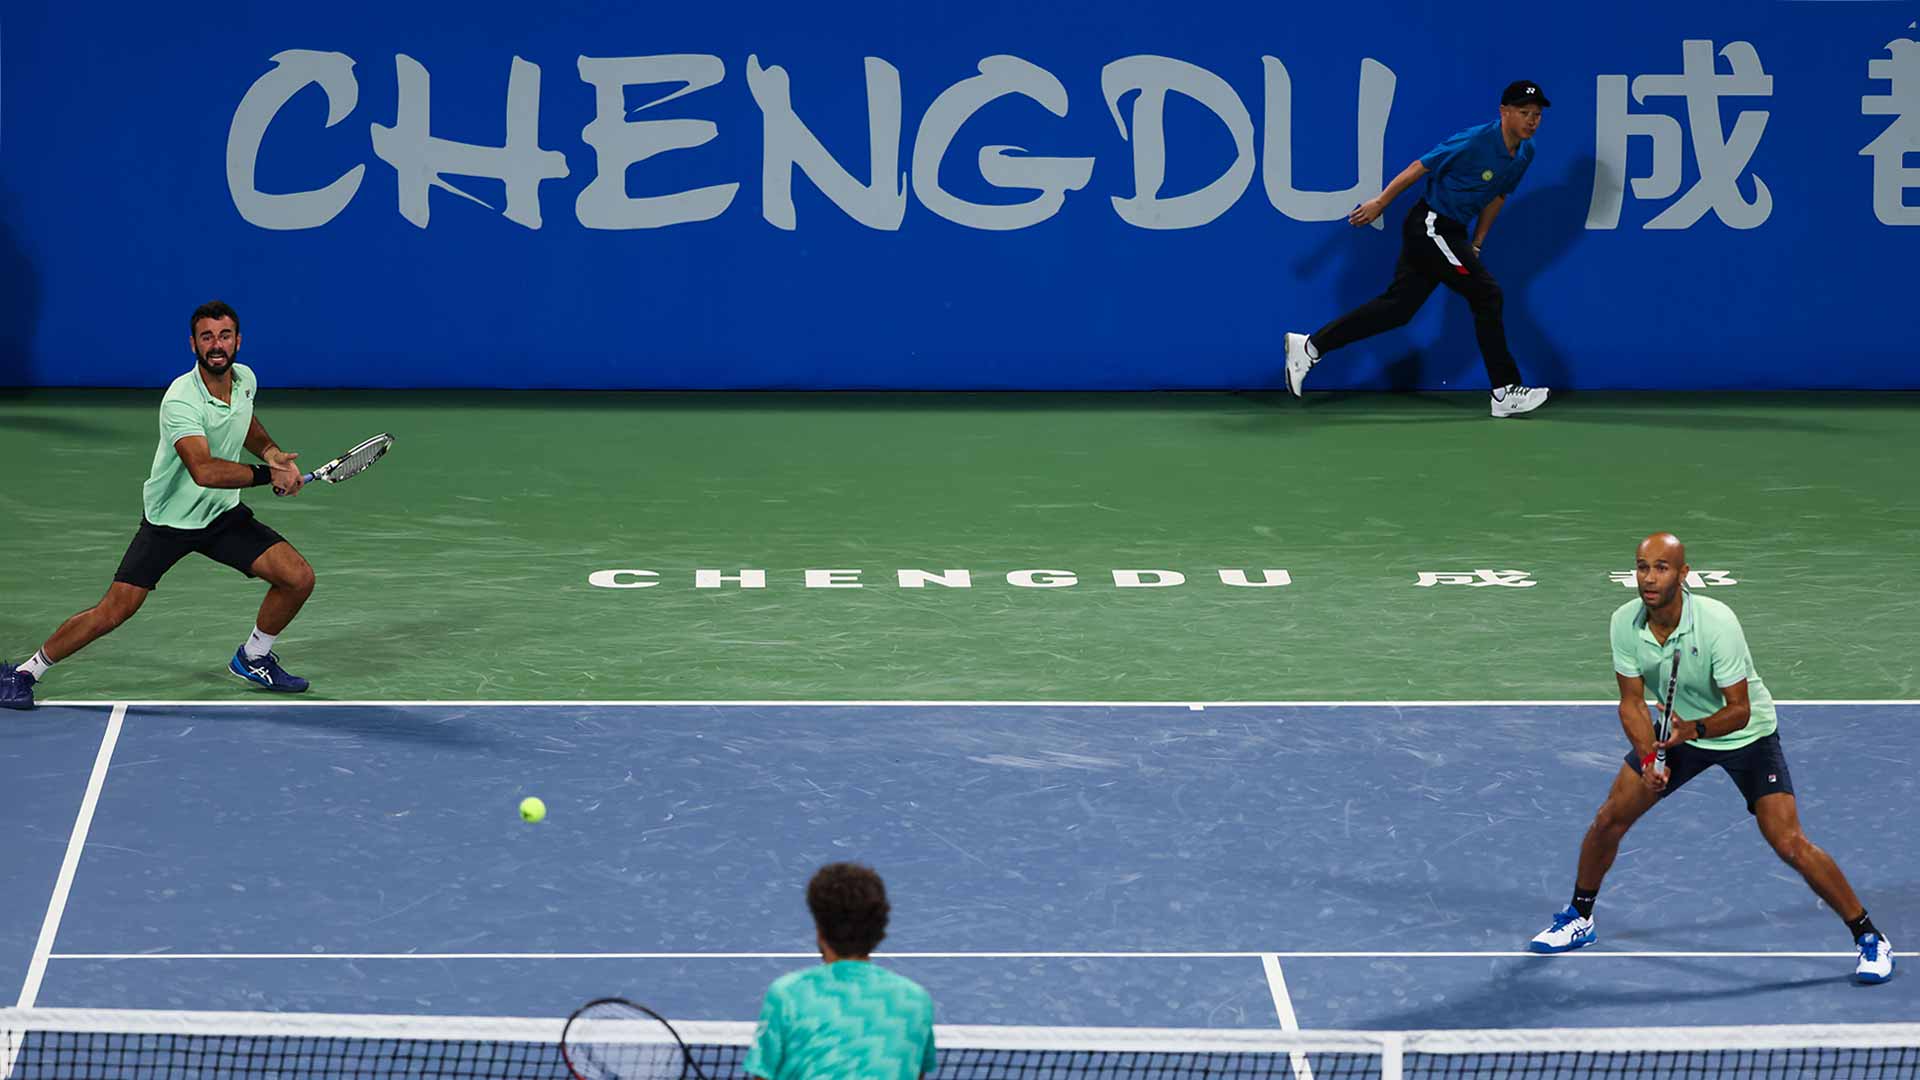 Fabien Reboul and Sadio Doumbia earn a Match Tie-break victory on Thursday to reach the second round in Chengdu. 